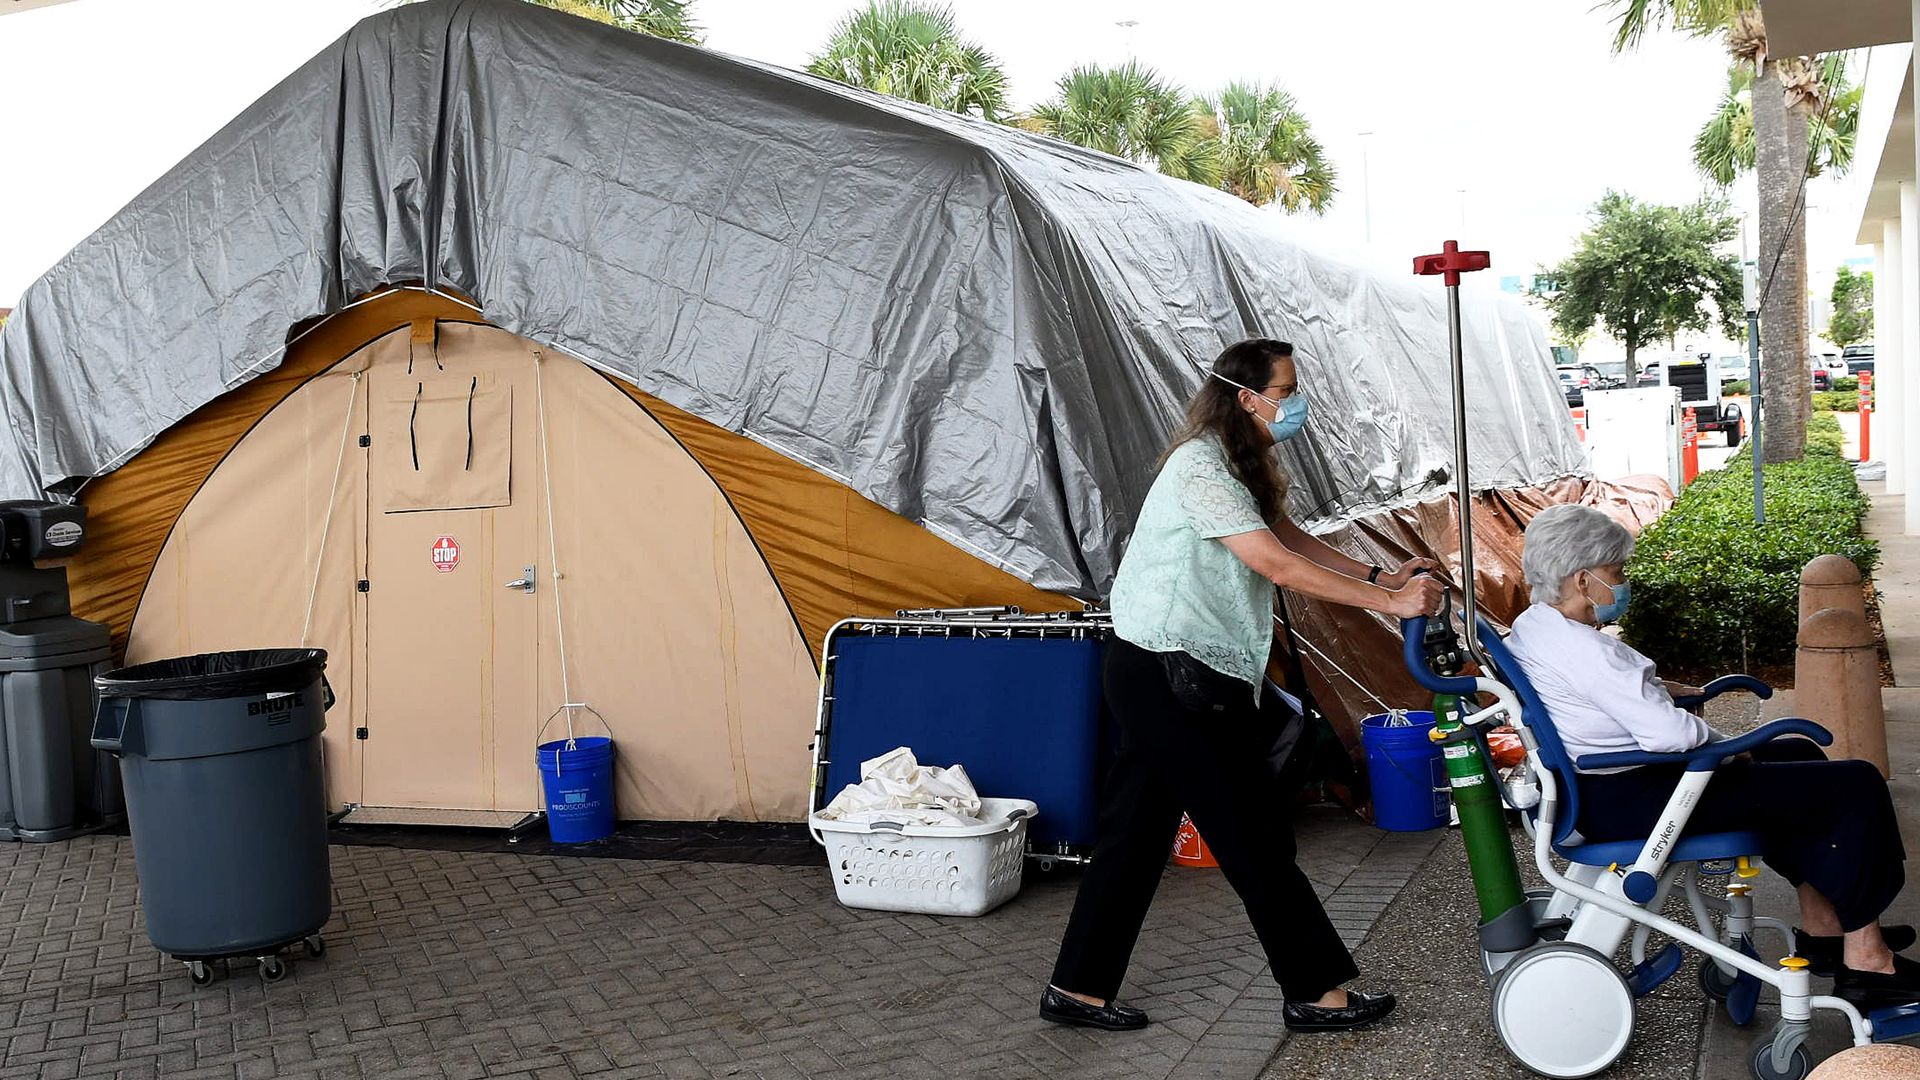 A patient is brought near a treatment tent outside the emergency department at Holmes Regional Medical Center in Melbourne.